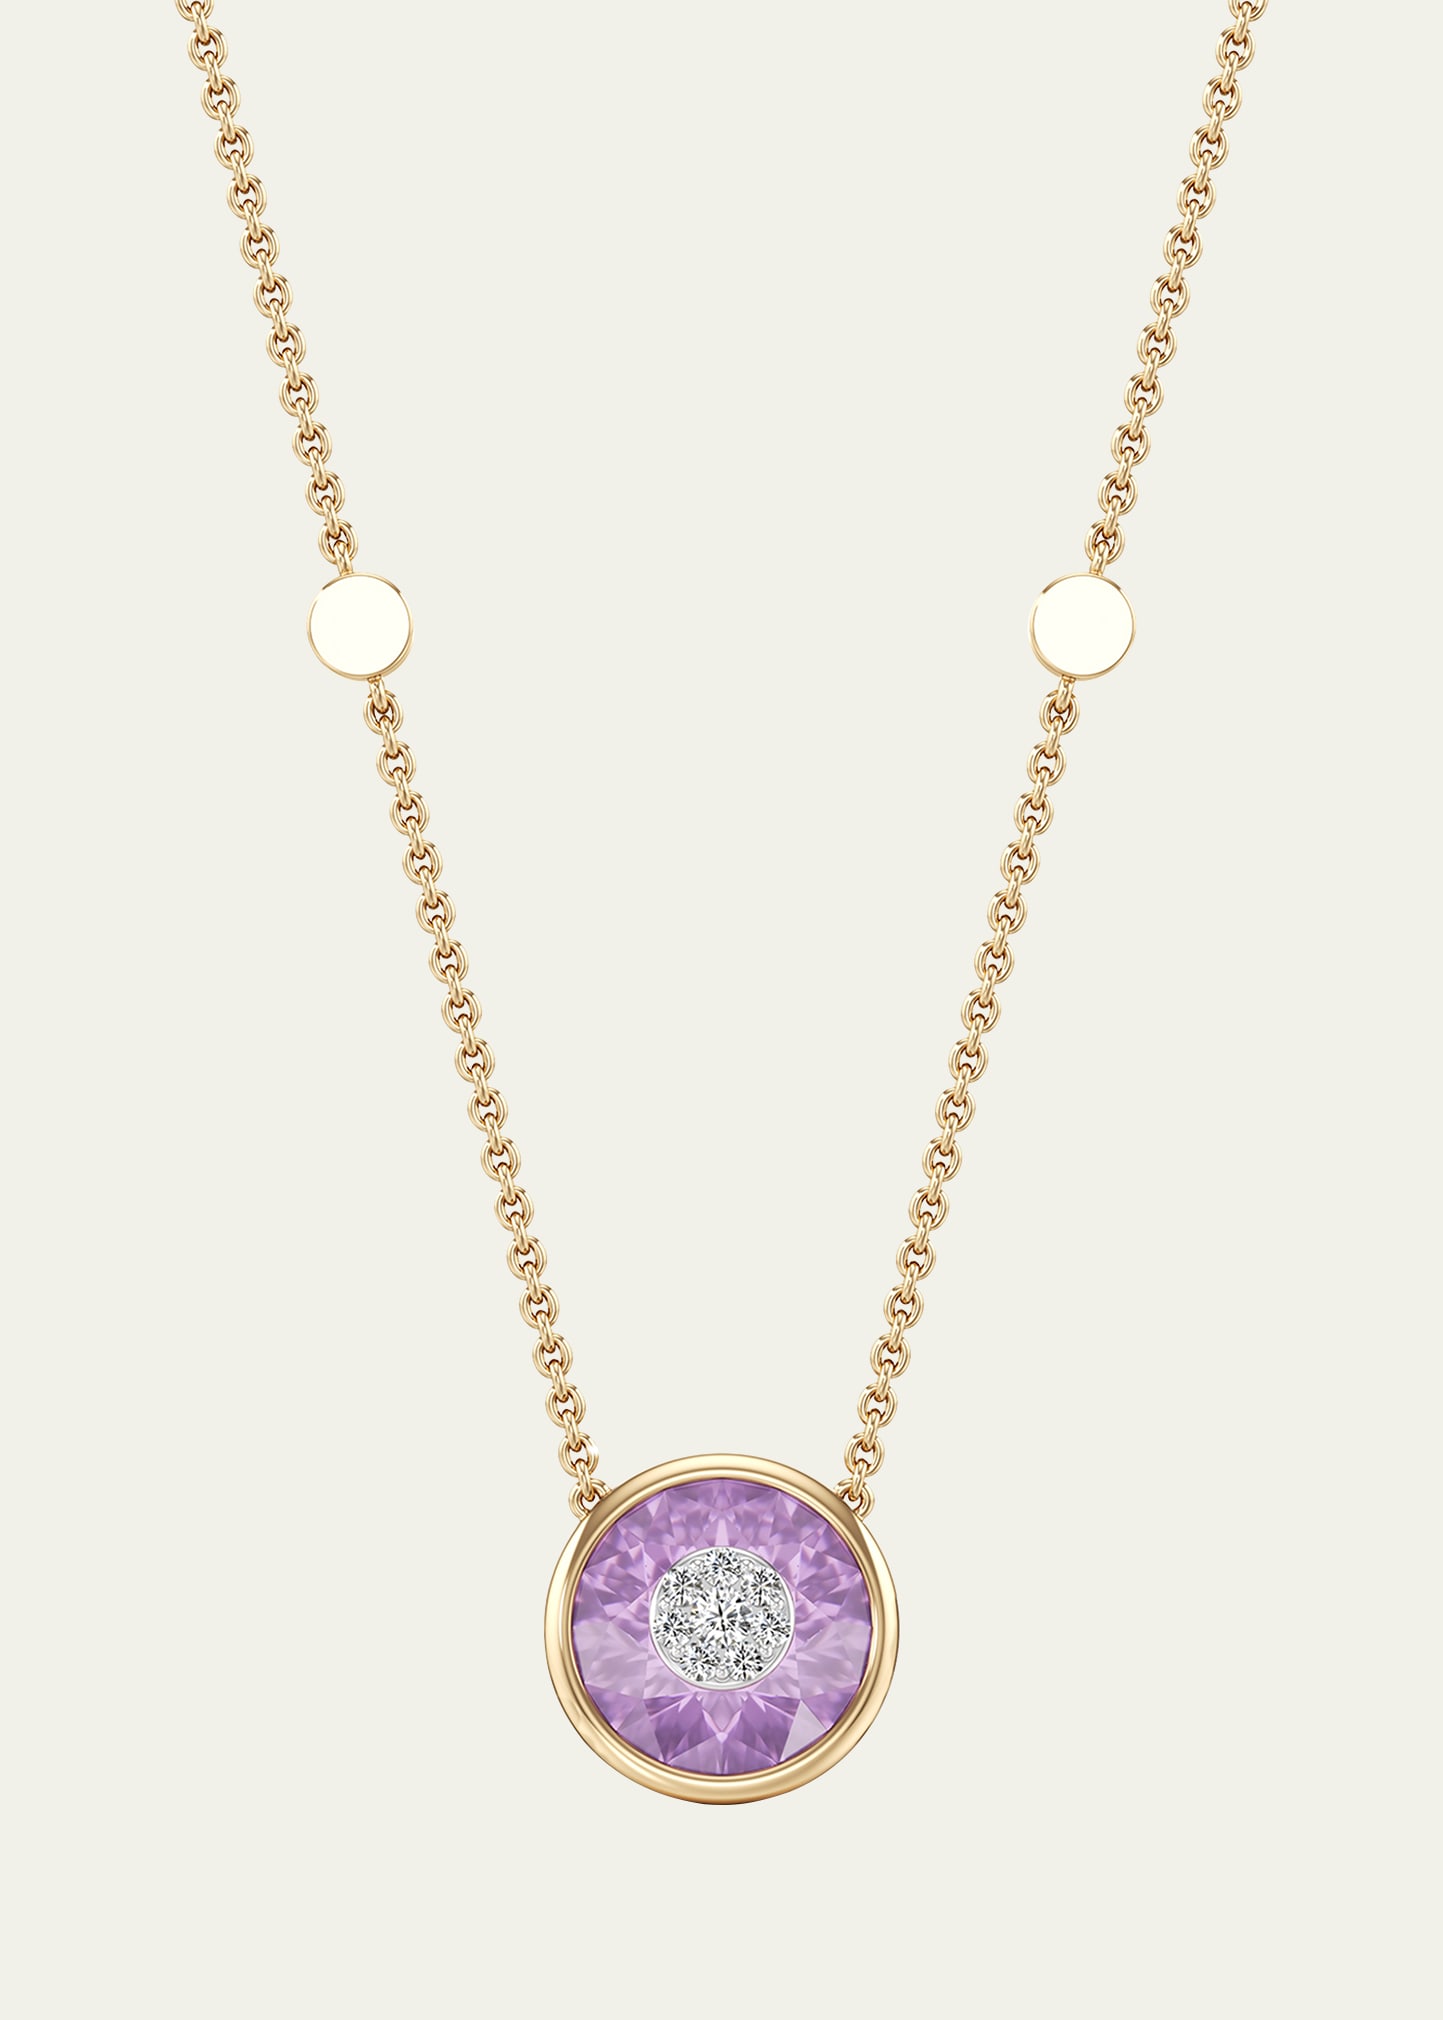 Bhansali One Collection 10mm Pendant Necklace with Yellow Gold Bezel, Amethyst